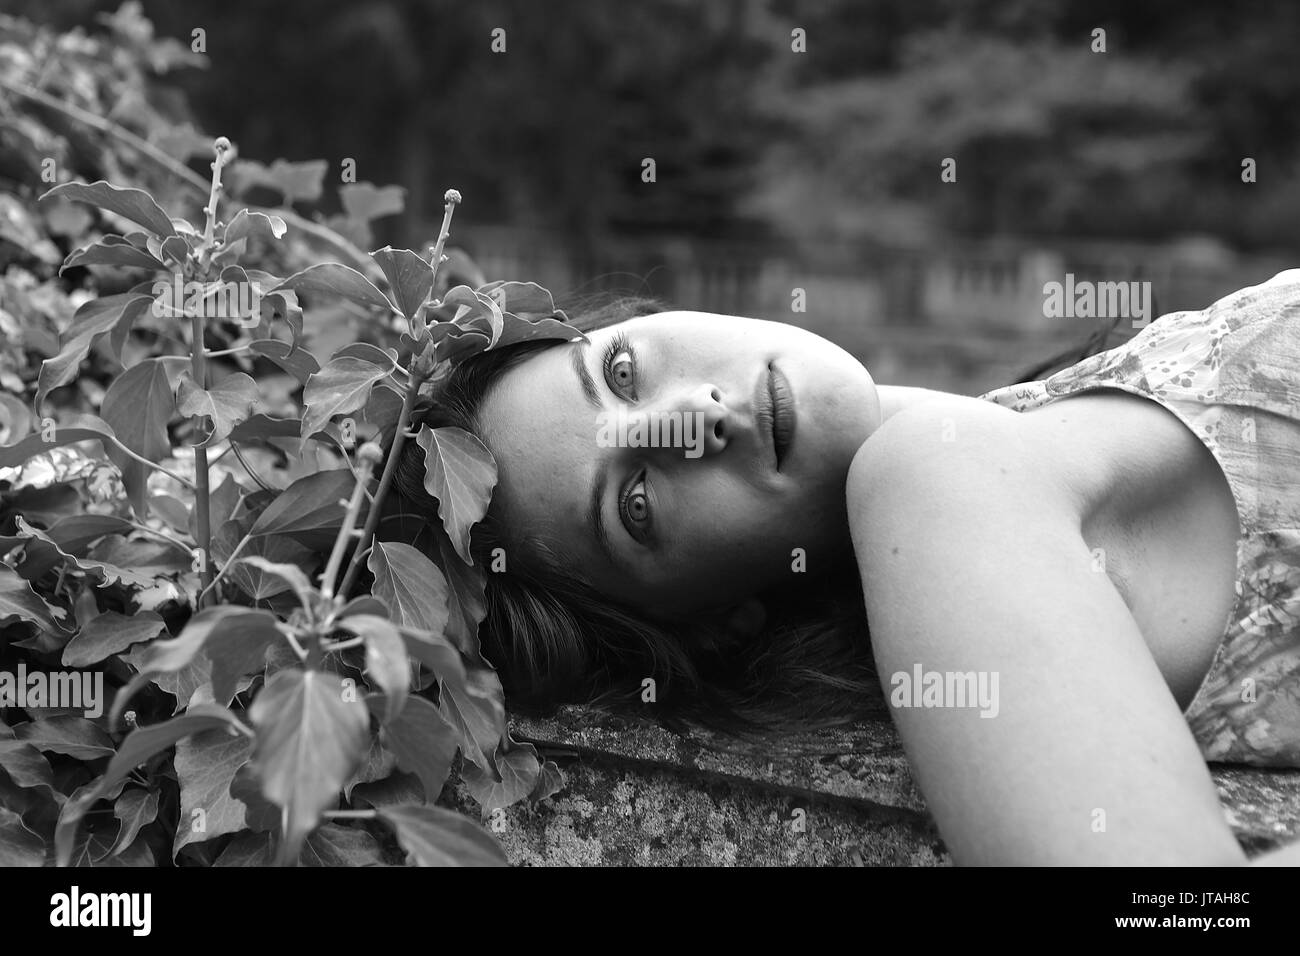 18 year old model Black and White Stock Photos & Images - Alamy